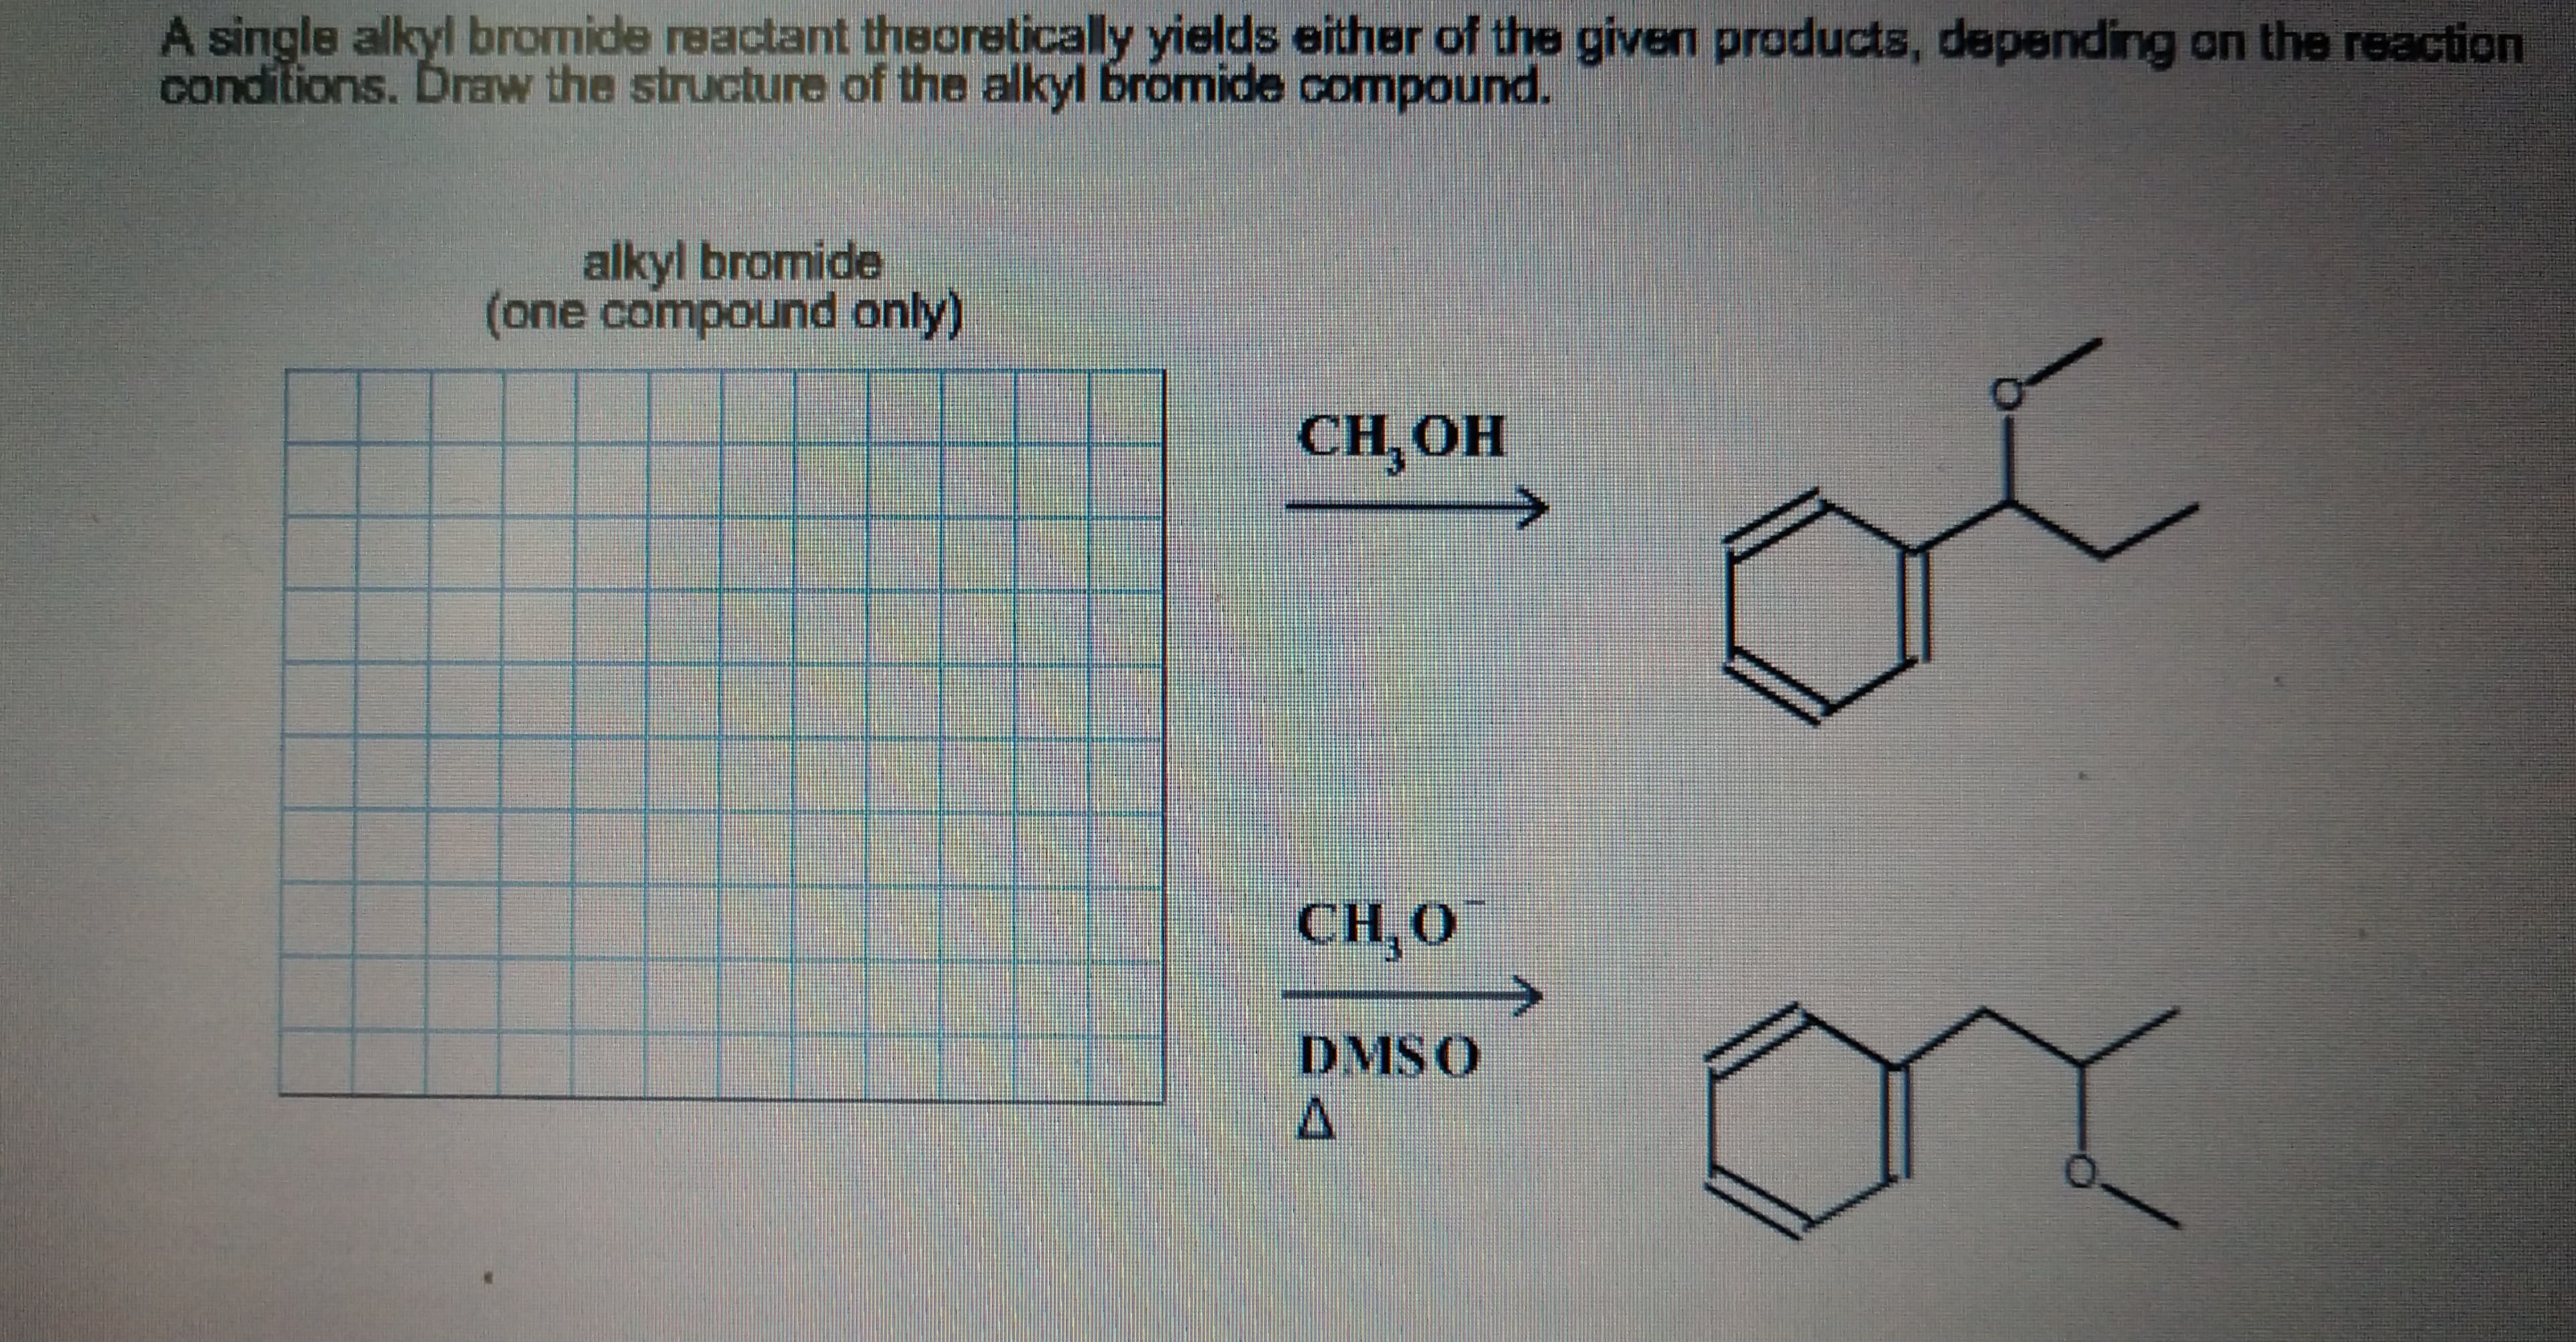 A single alkyl bromide reactant theoretically yields either of the given products, depending on the reaction
conditions. Draw the structure of the alkyl bromide compound.
alkyl bromide
(one compound only)
CH, ОН
СH O
DMSO
